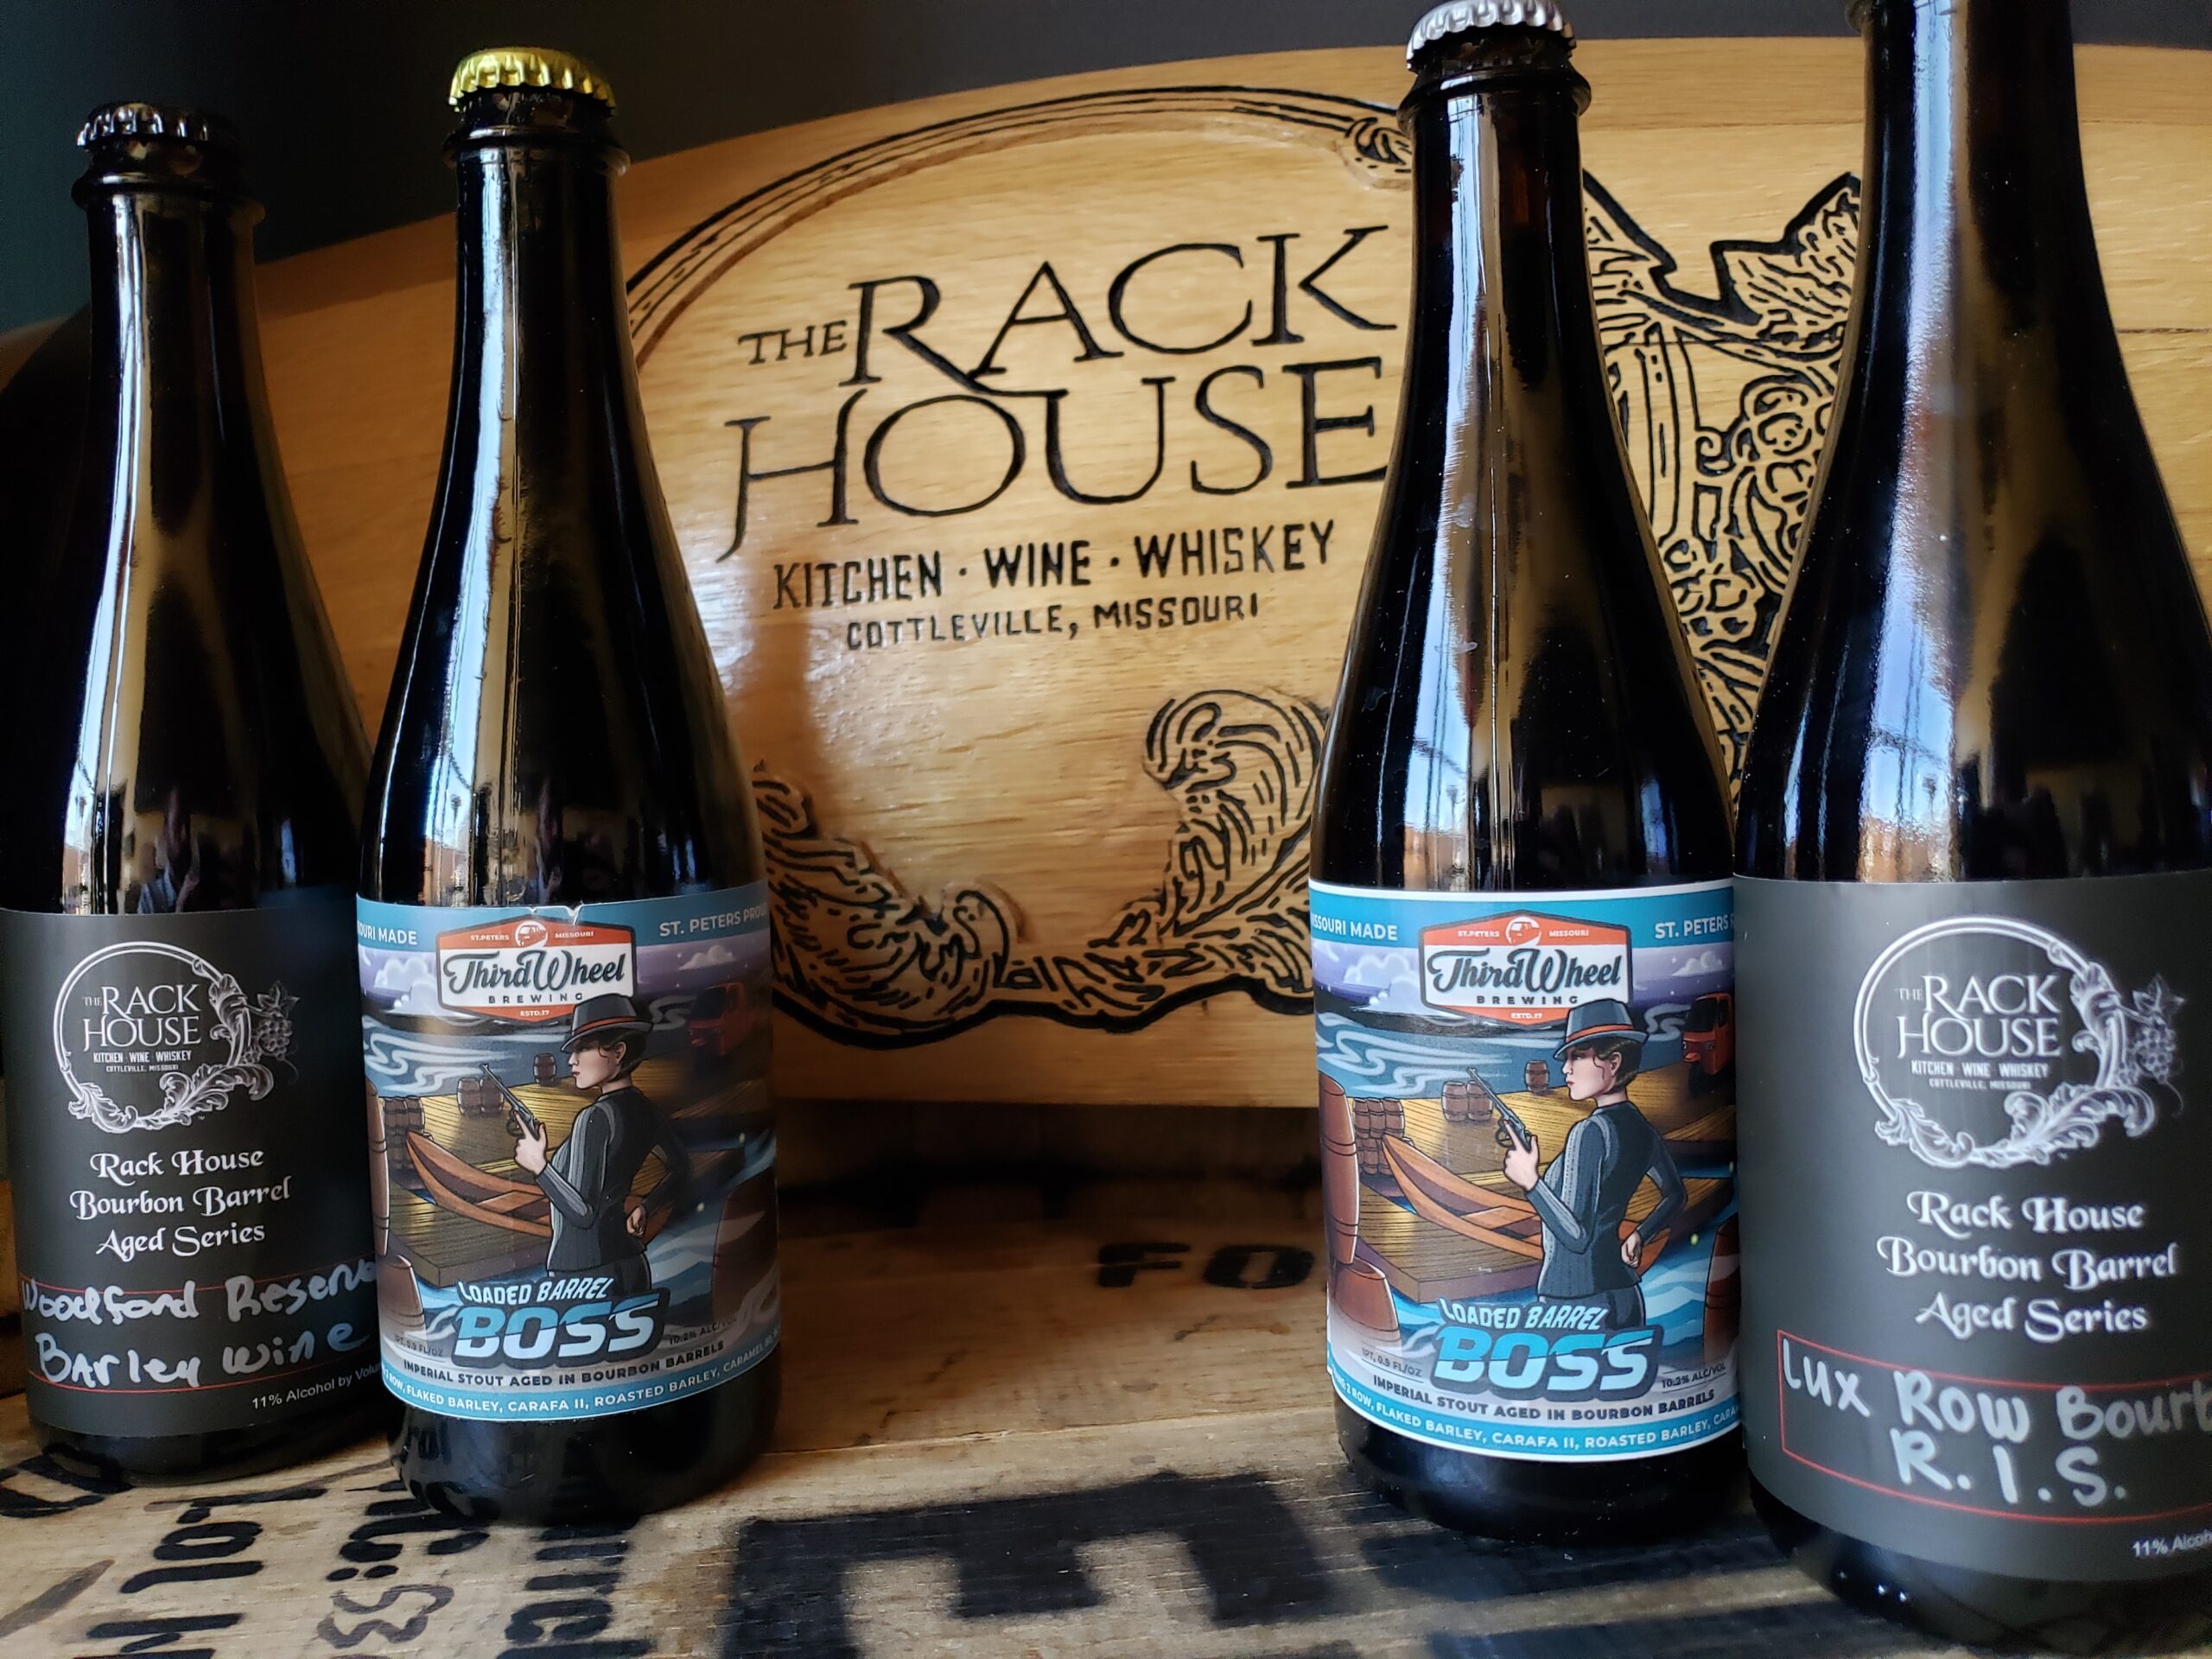 Beer Dinner: Featuring barrel-aged beers from Rack House single barrel picks